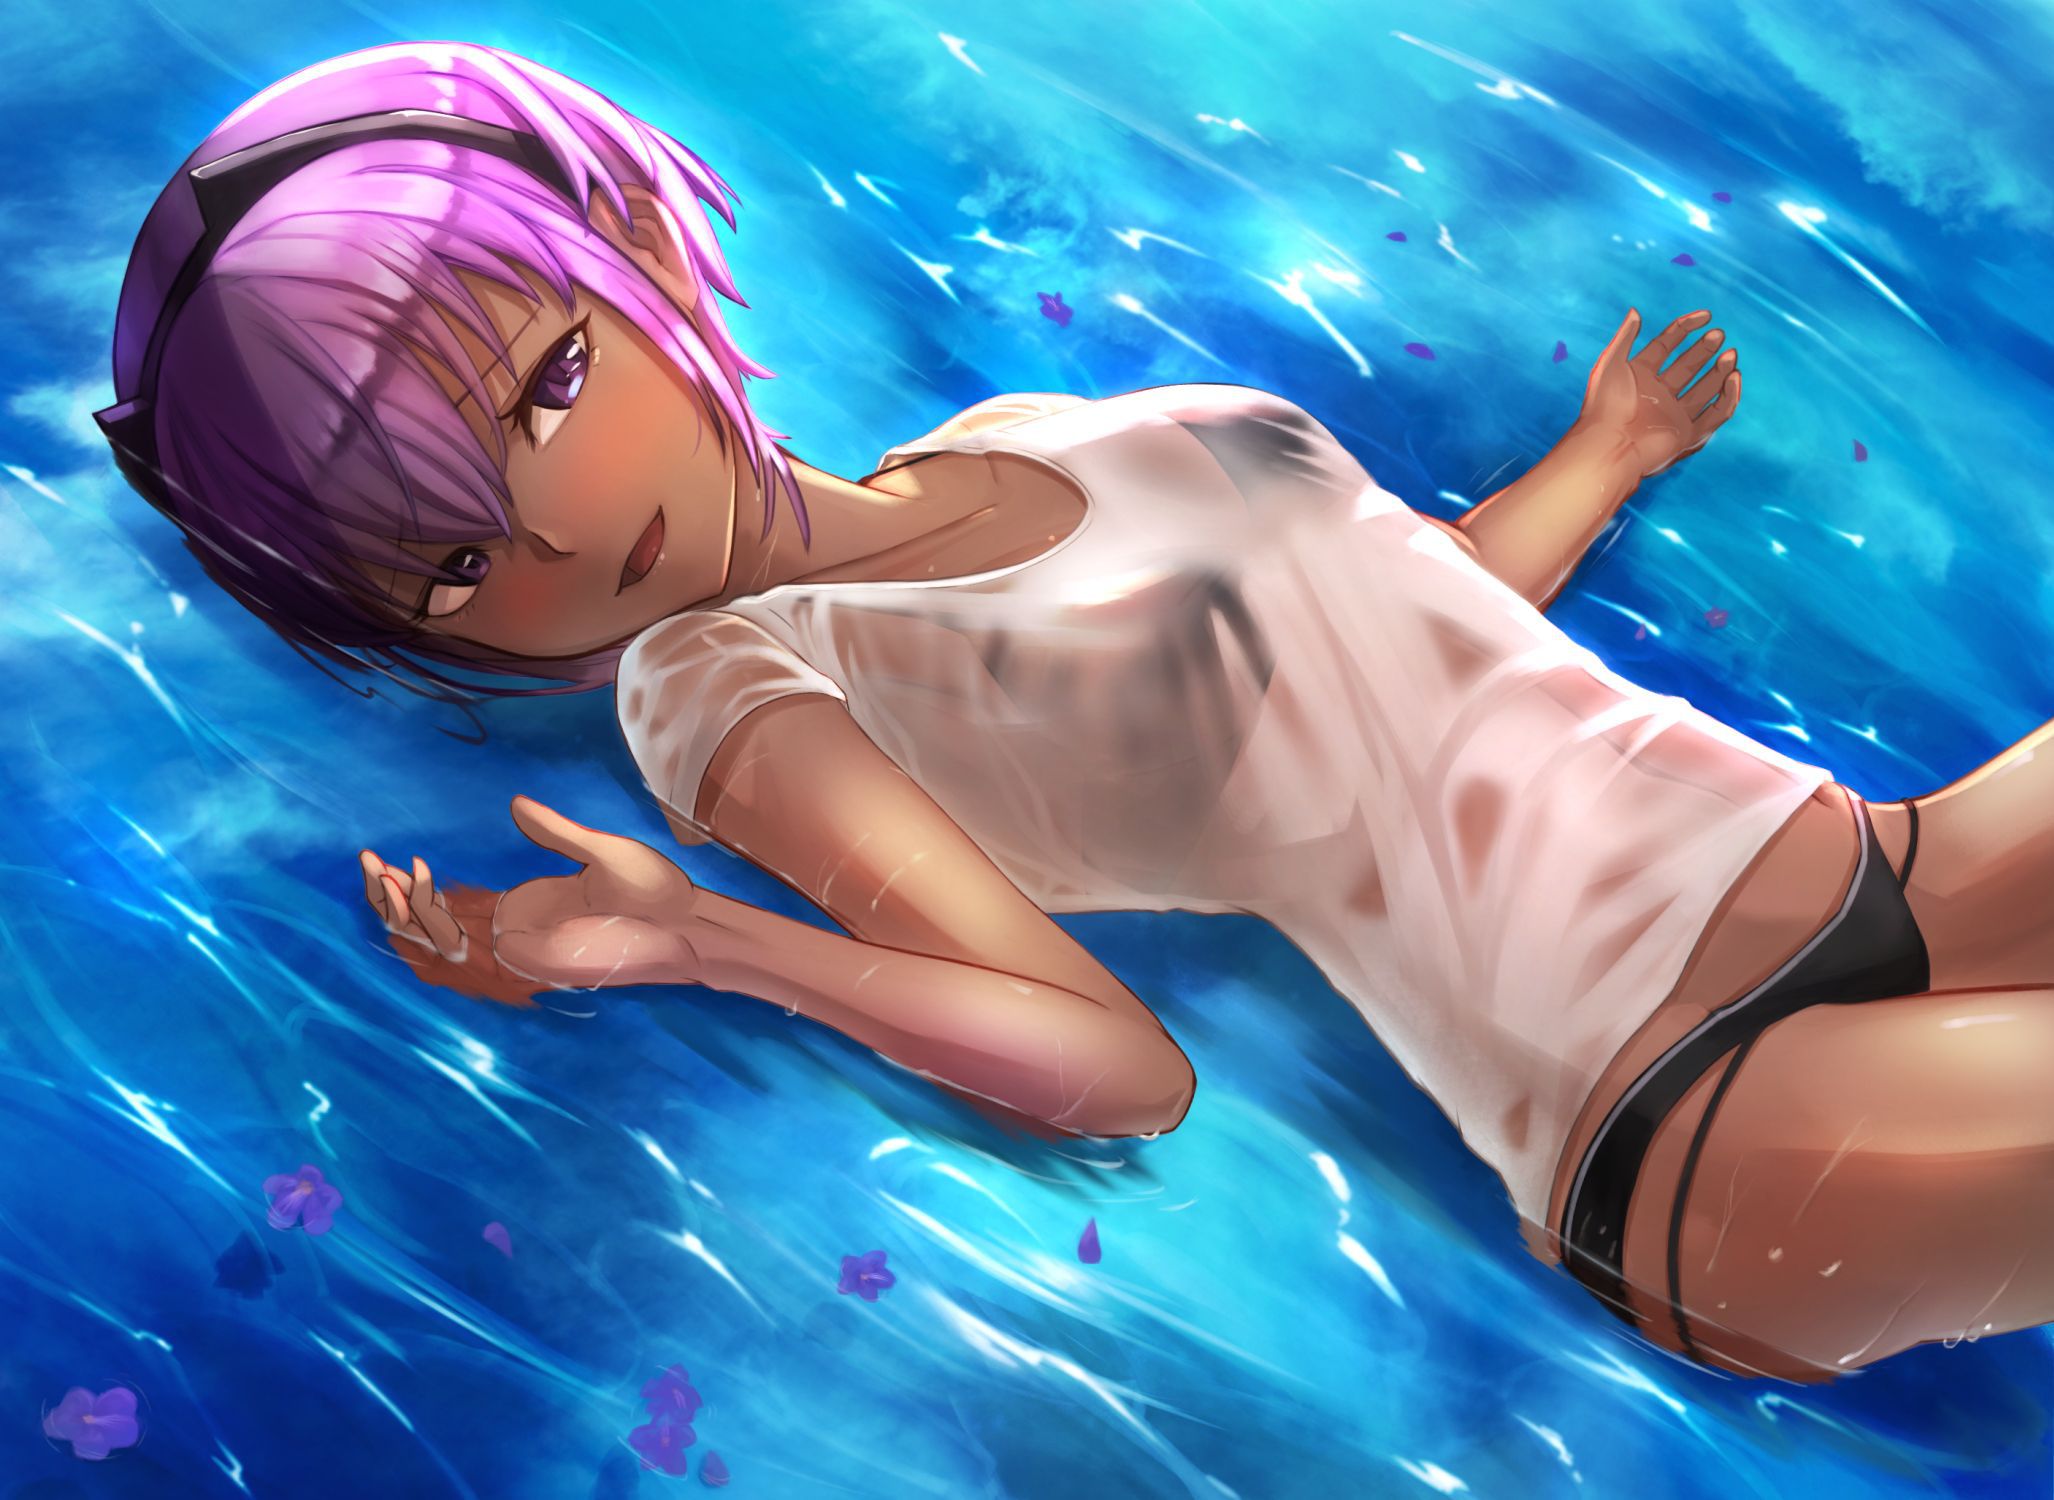 [Secondary/ZIP] wet transparent beautiful girl image that I see underwear or skin wet clothes 28